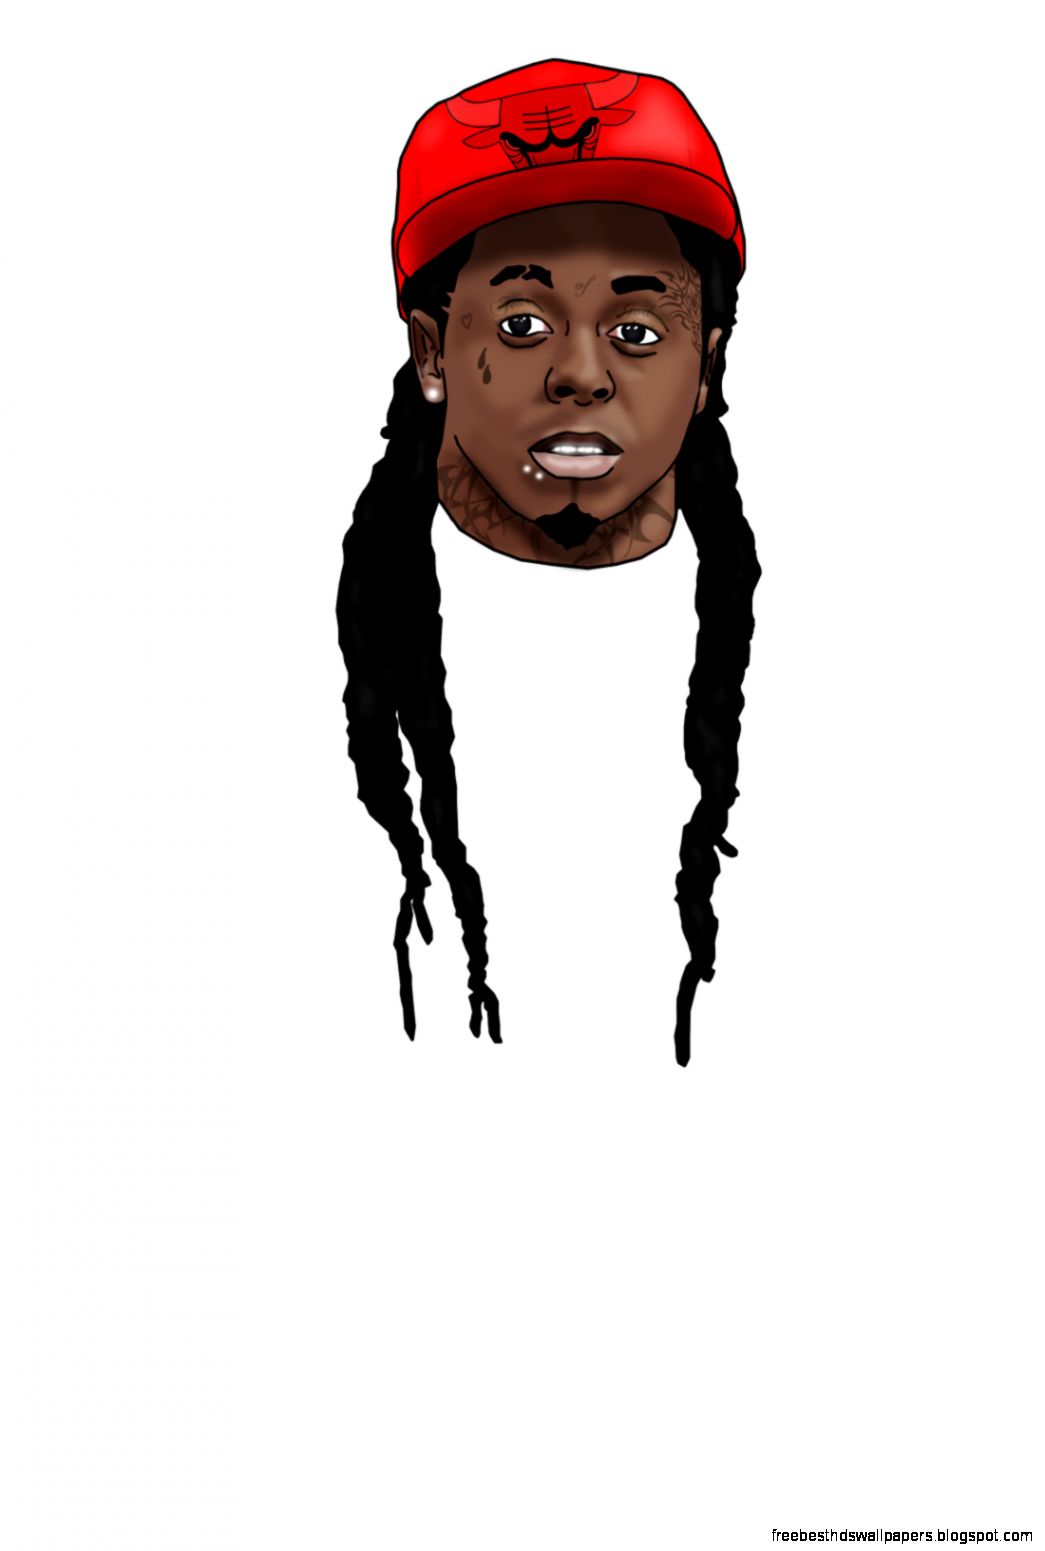 Lil Wayne Picture On High Resolution Wallpaper - Lil Wayne Wallpaper Hd - HD Wallpaper 